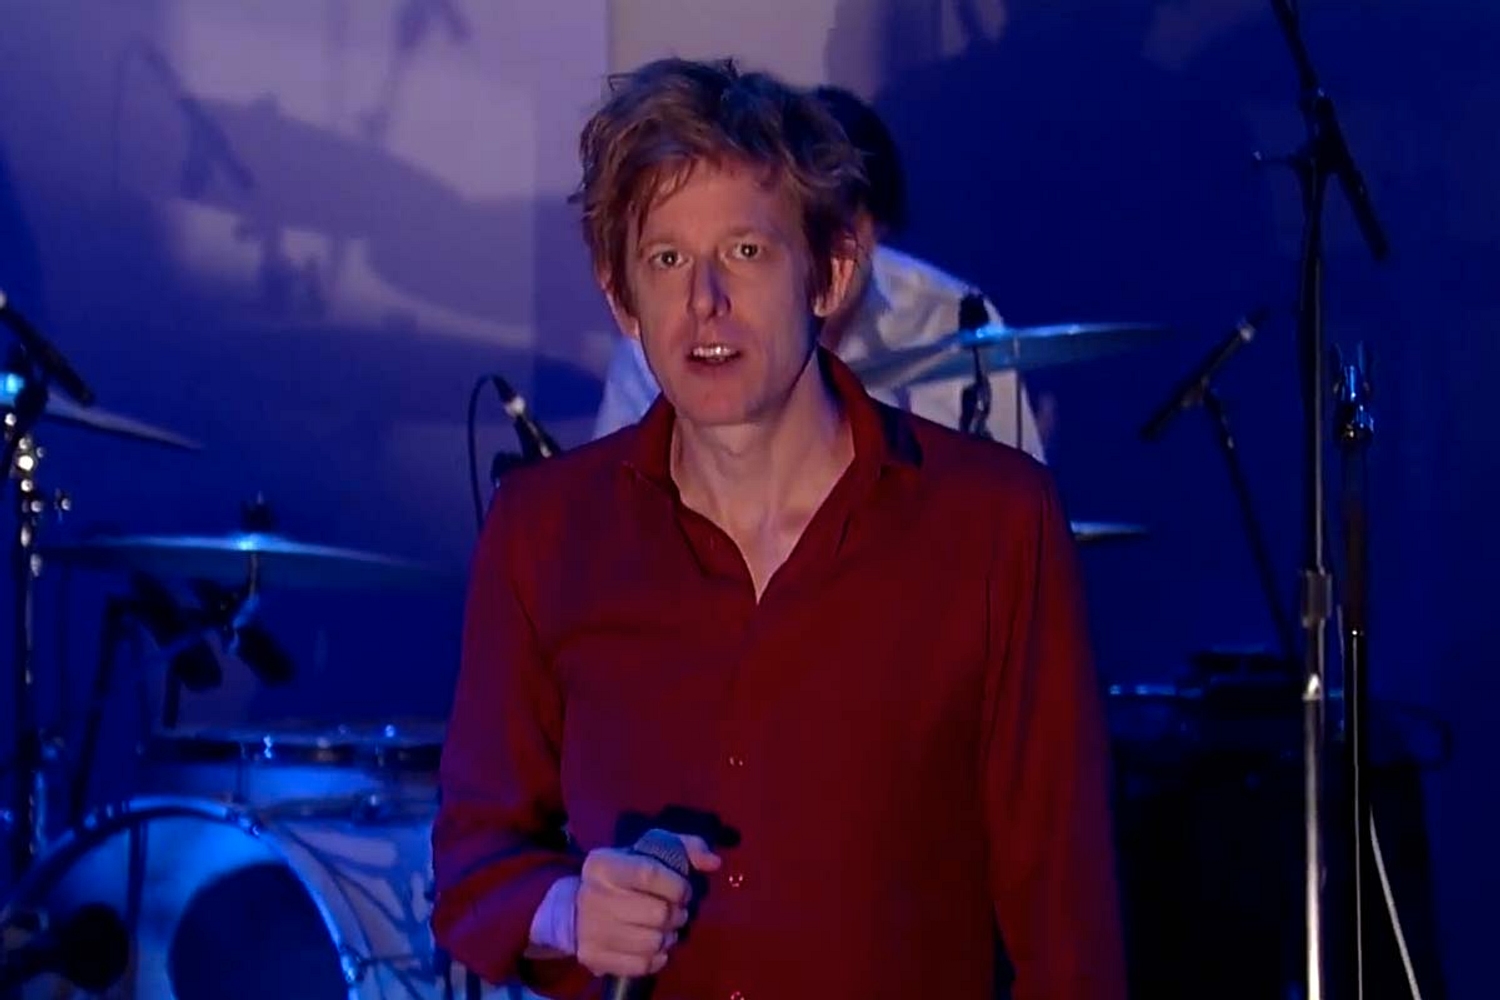 Watch Spoon bring ‘Inside Out’ to Letterman